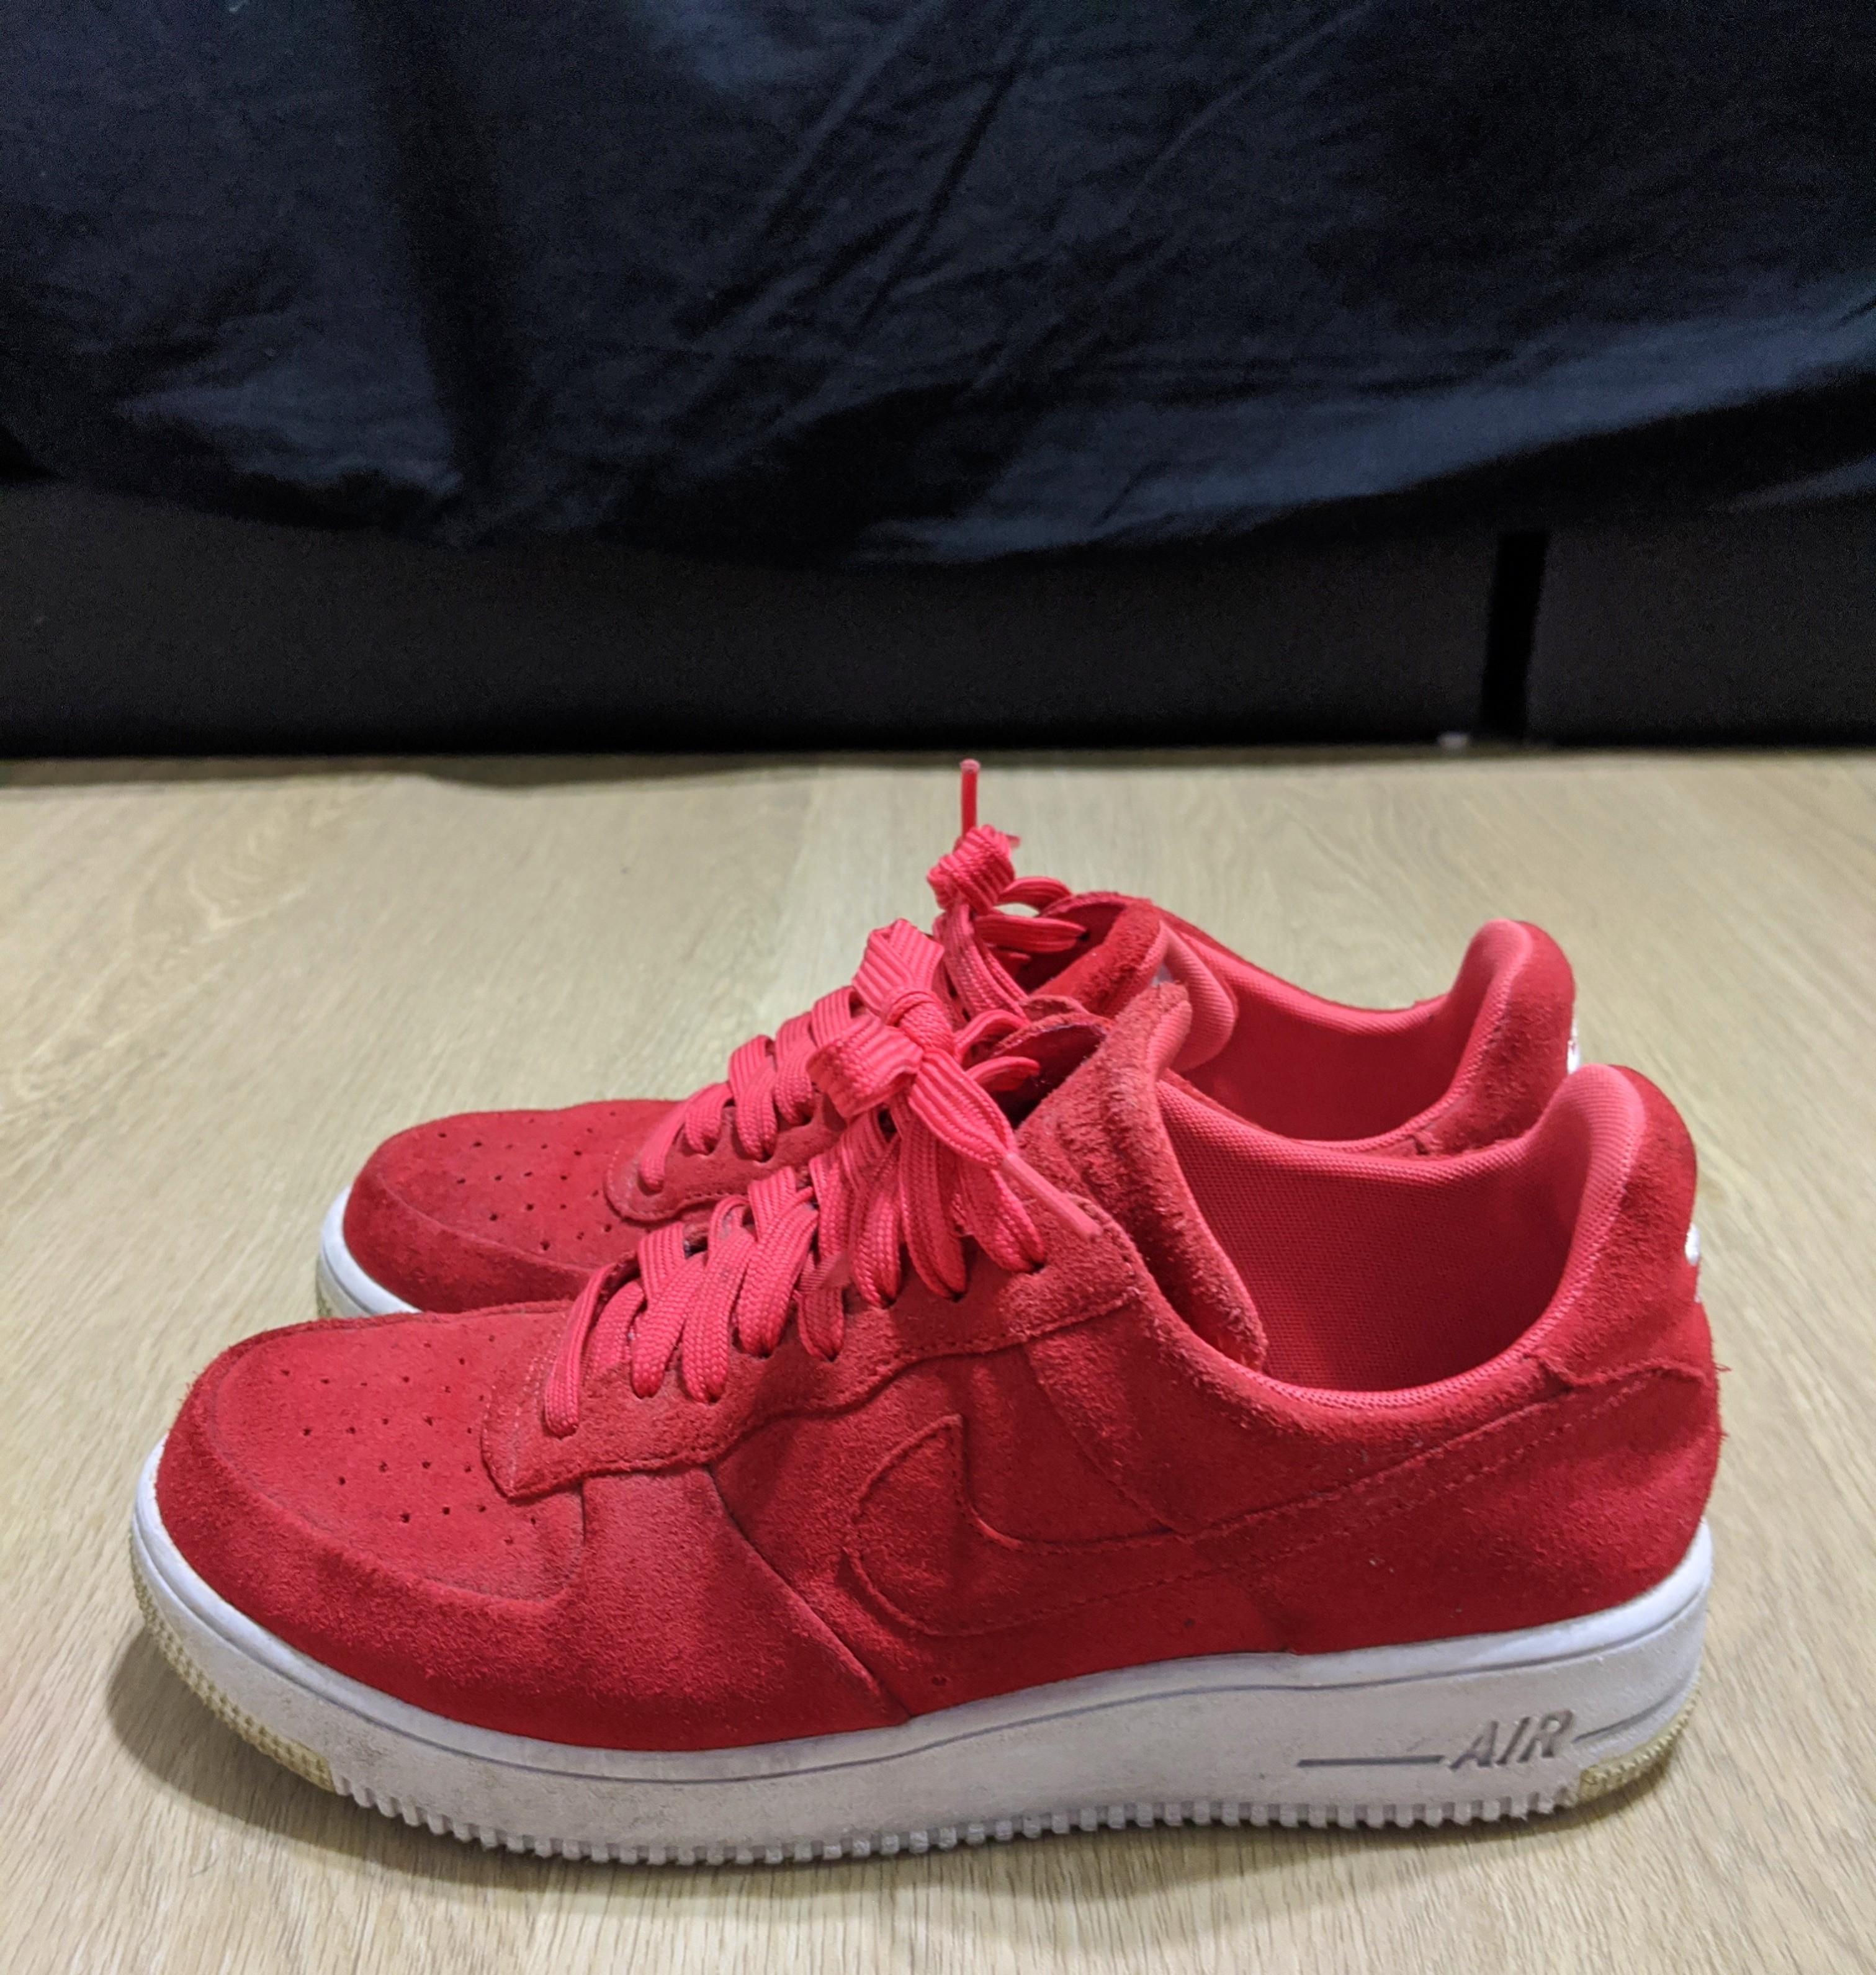 Nike Air Force 1 Low Vactech Red Suede 